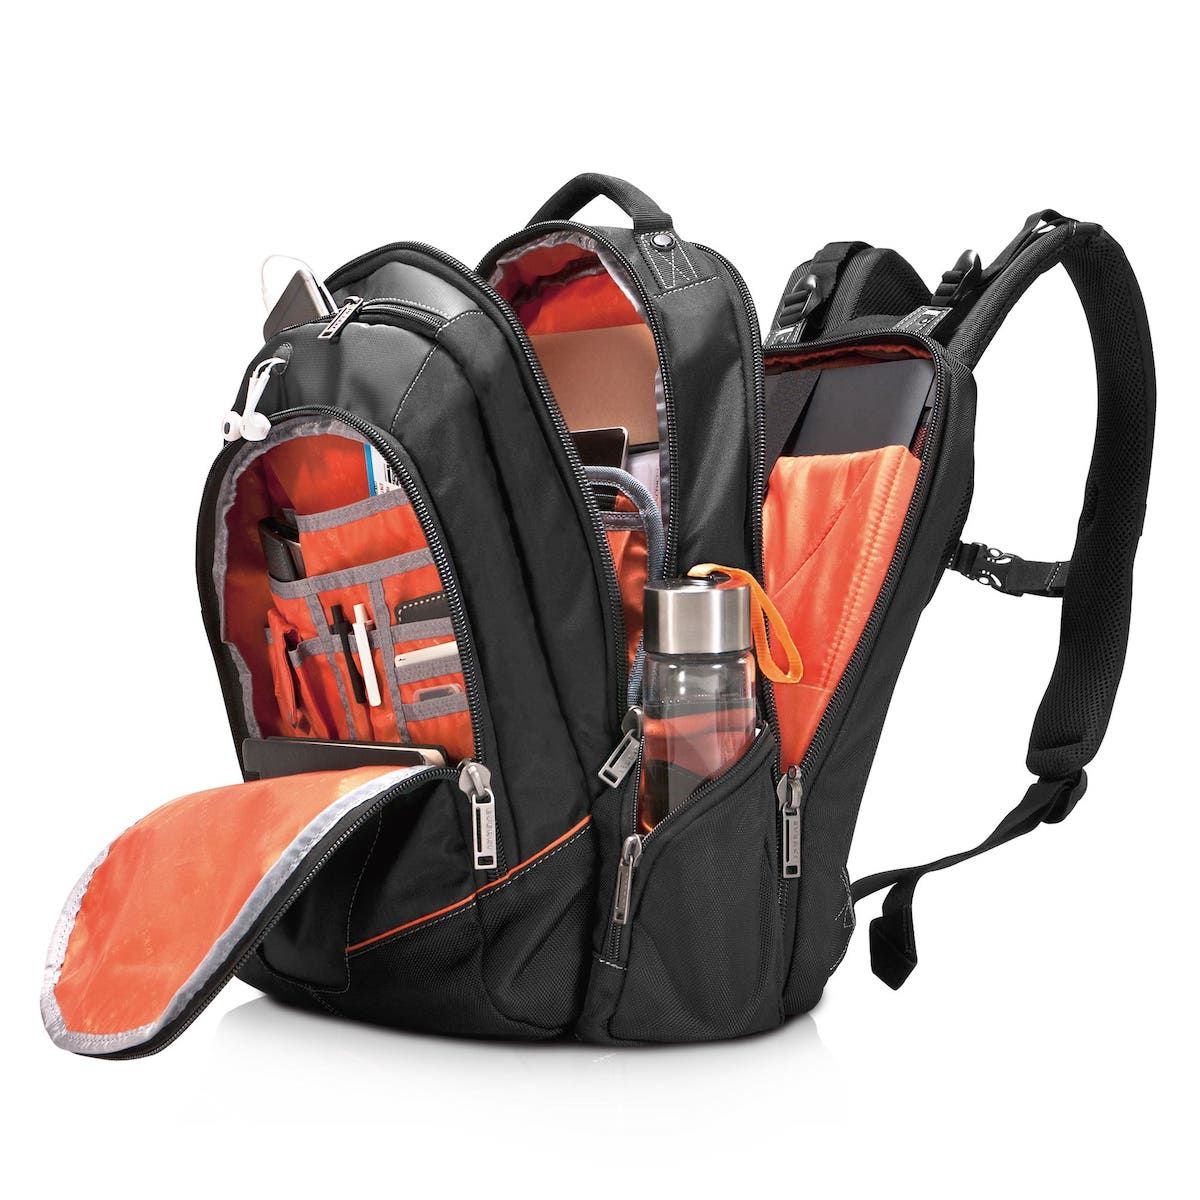 best travel laptop backpack india